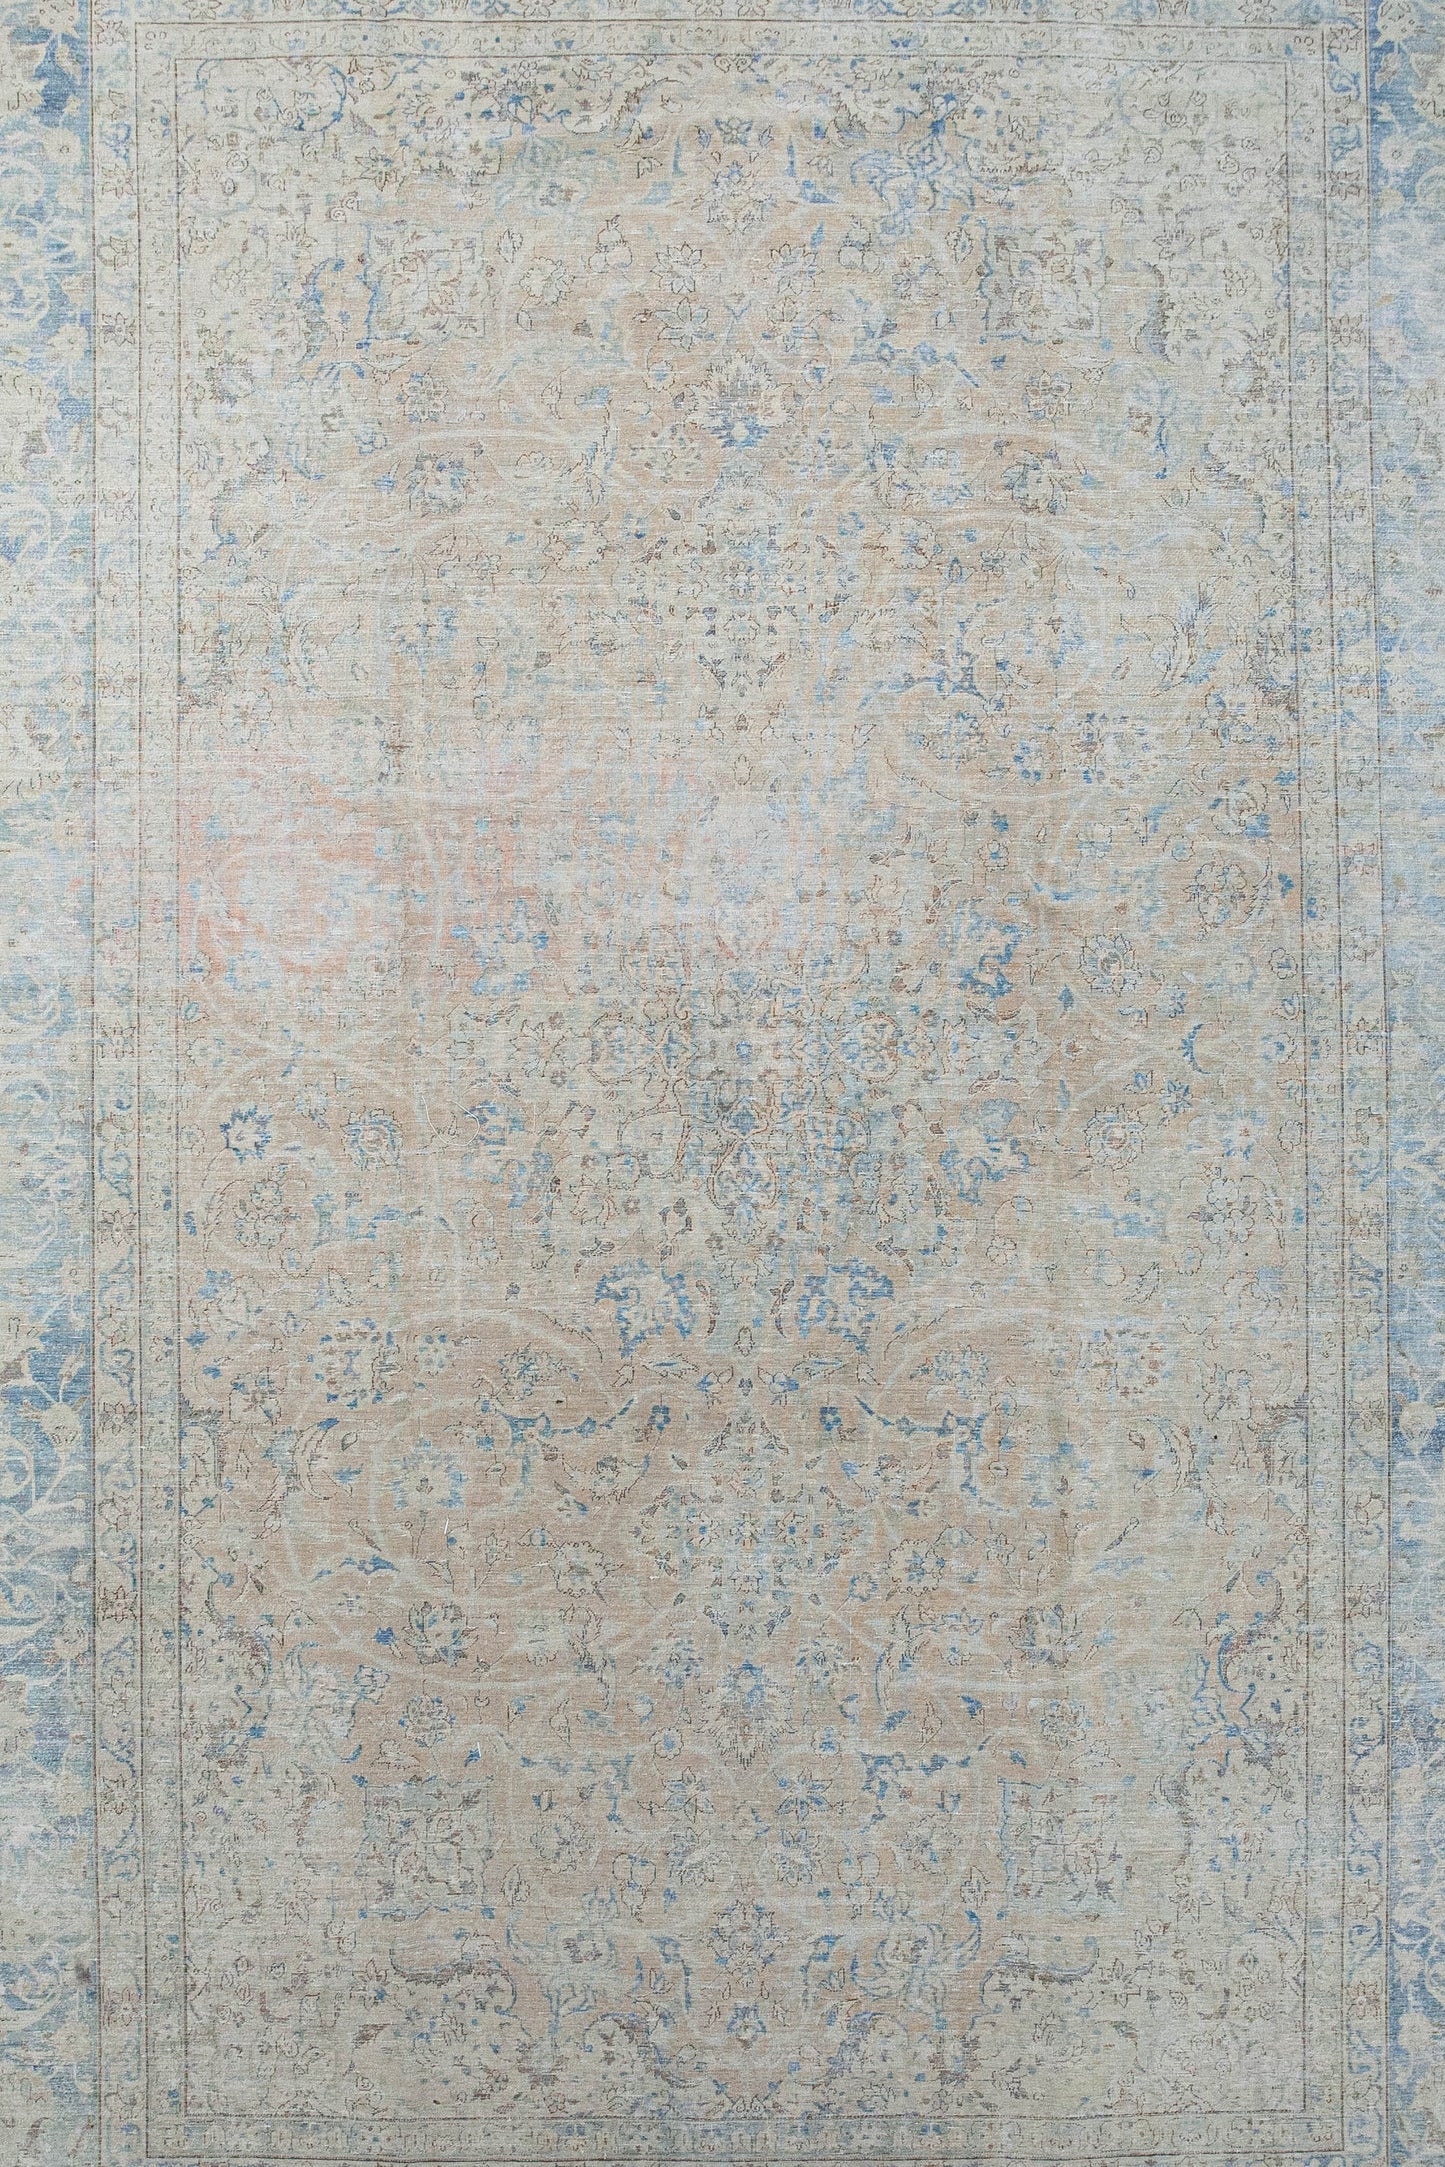 A big distressed snowflake is the centered design of this rug.